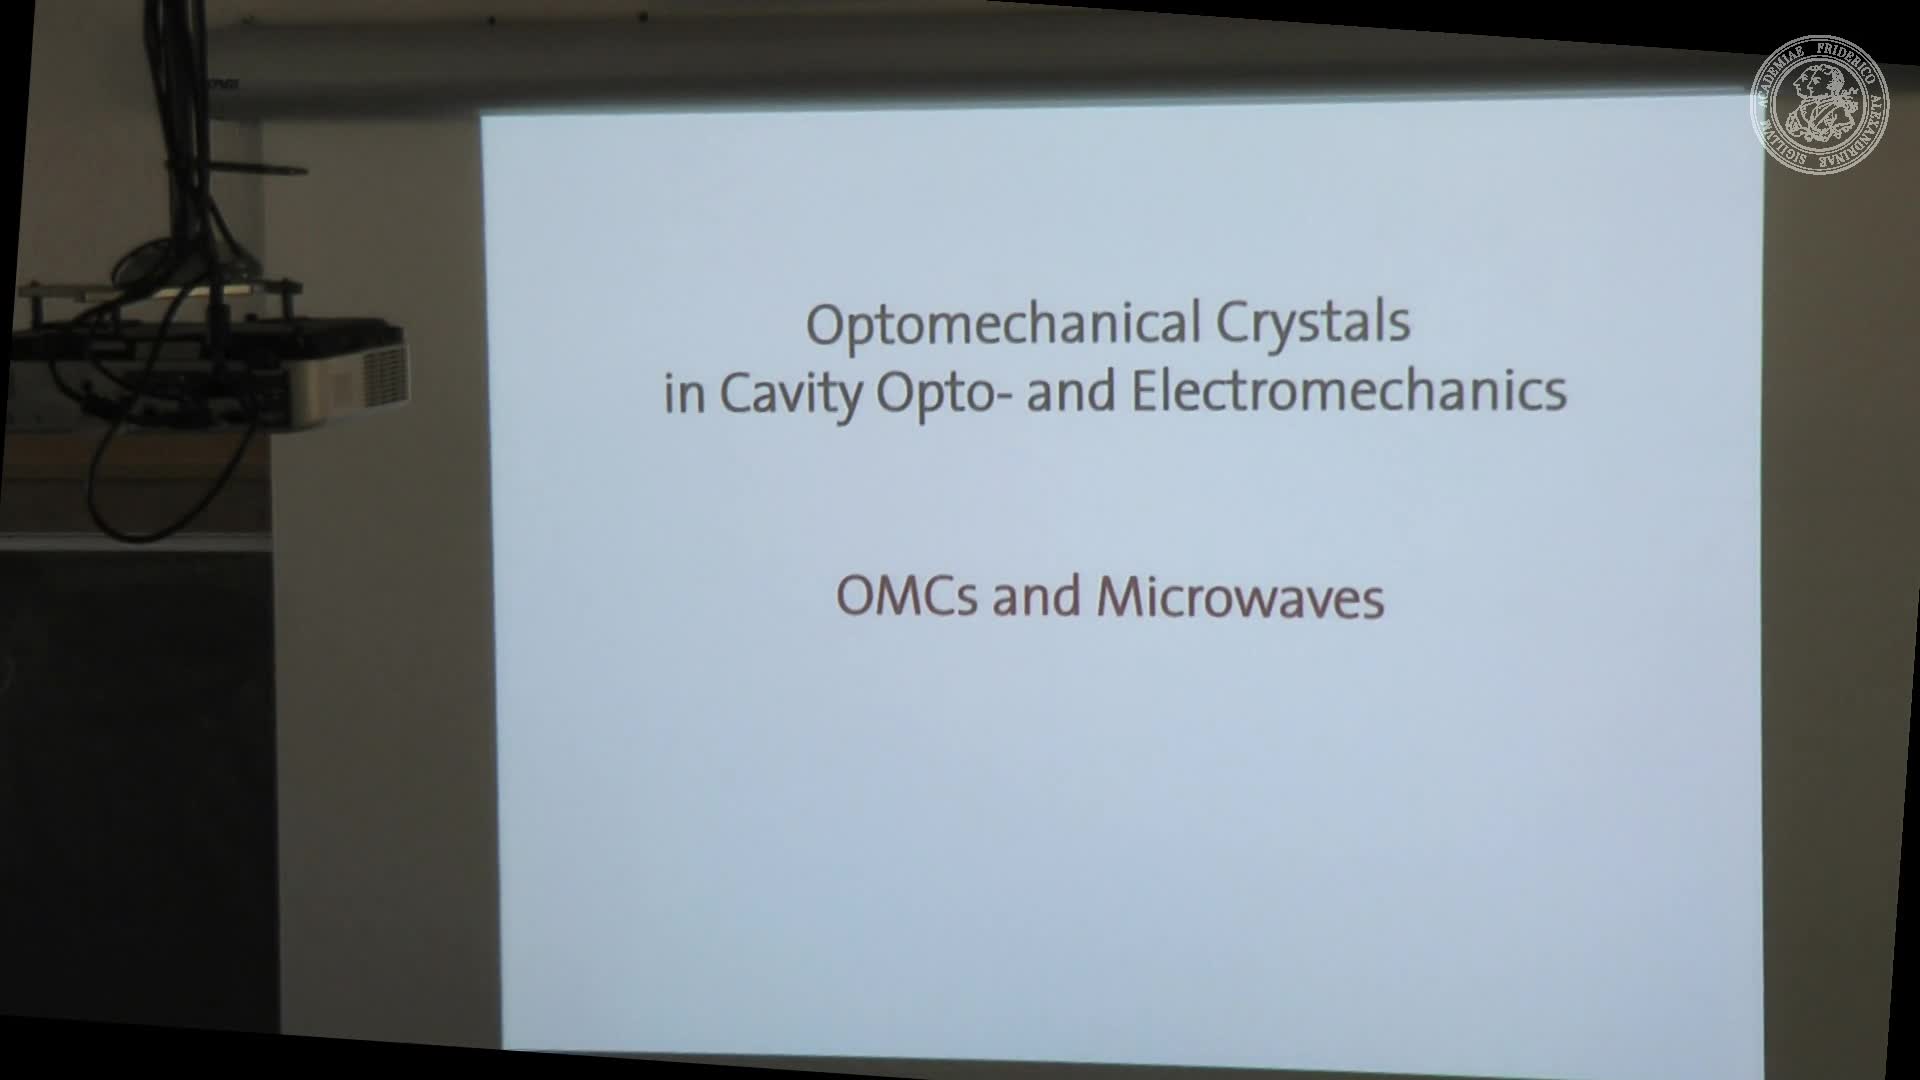 Optomechanical Crystals in Cavity Opto- and Electromechanics - 3 preview image